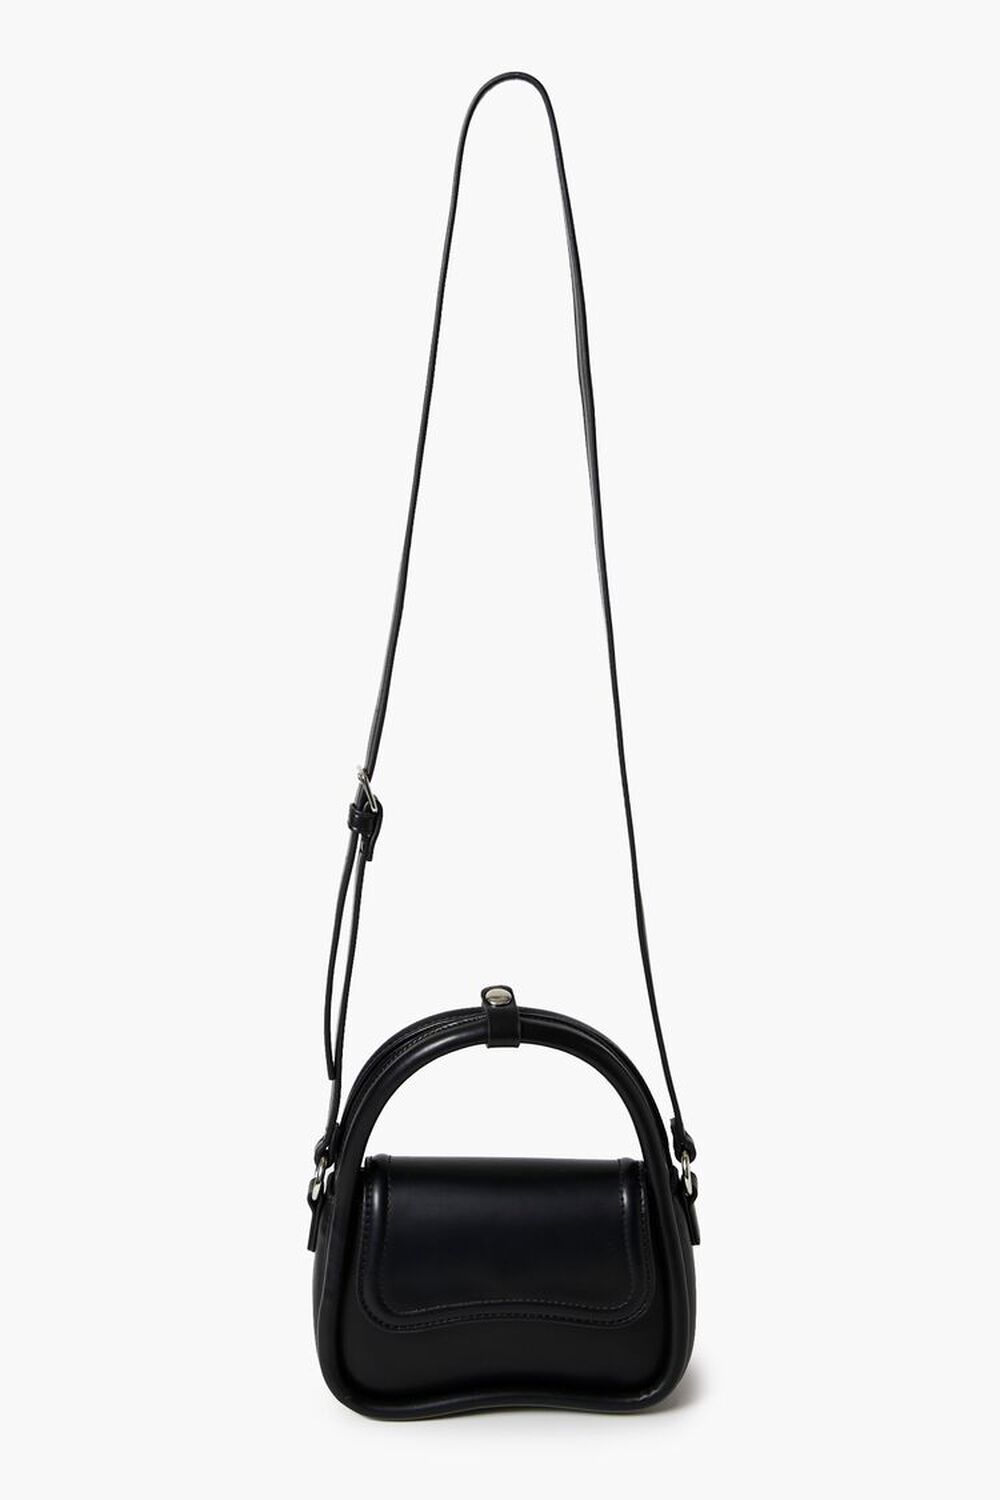 Forever 21 Women's Faux Leather/Pleather O-Ring Crossbody Bag in Black | Concert & Festival Clothes | F21